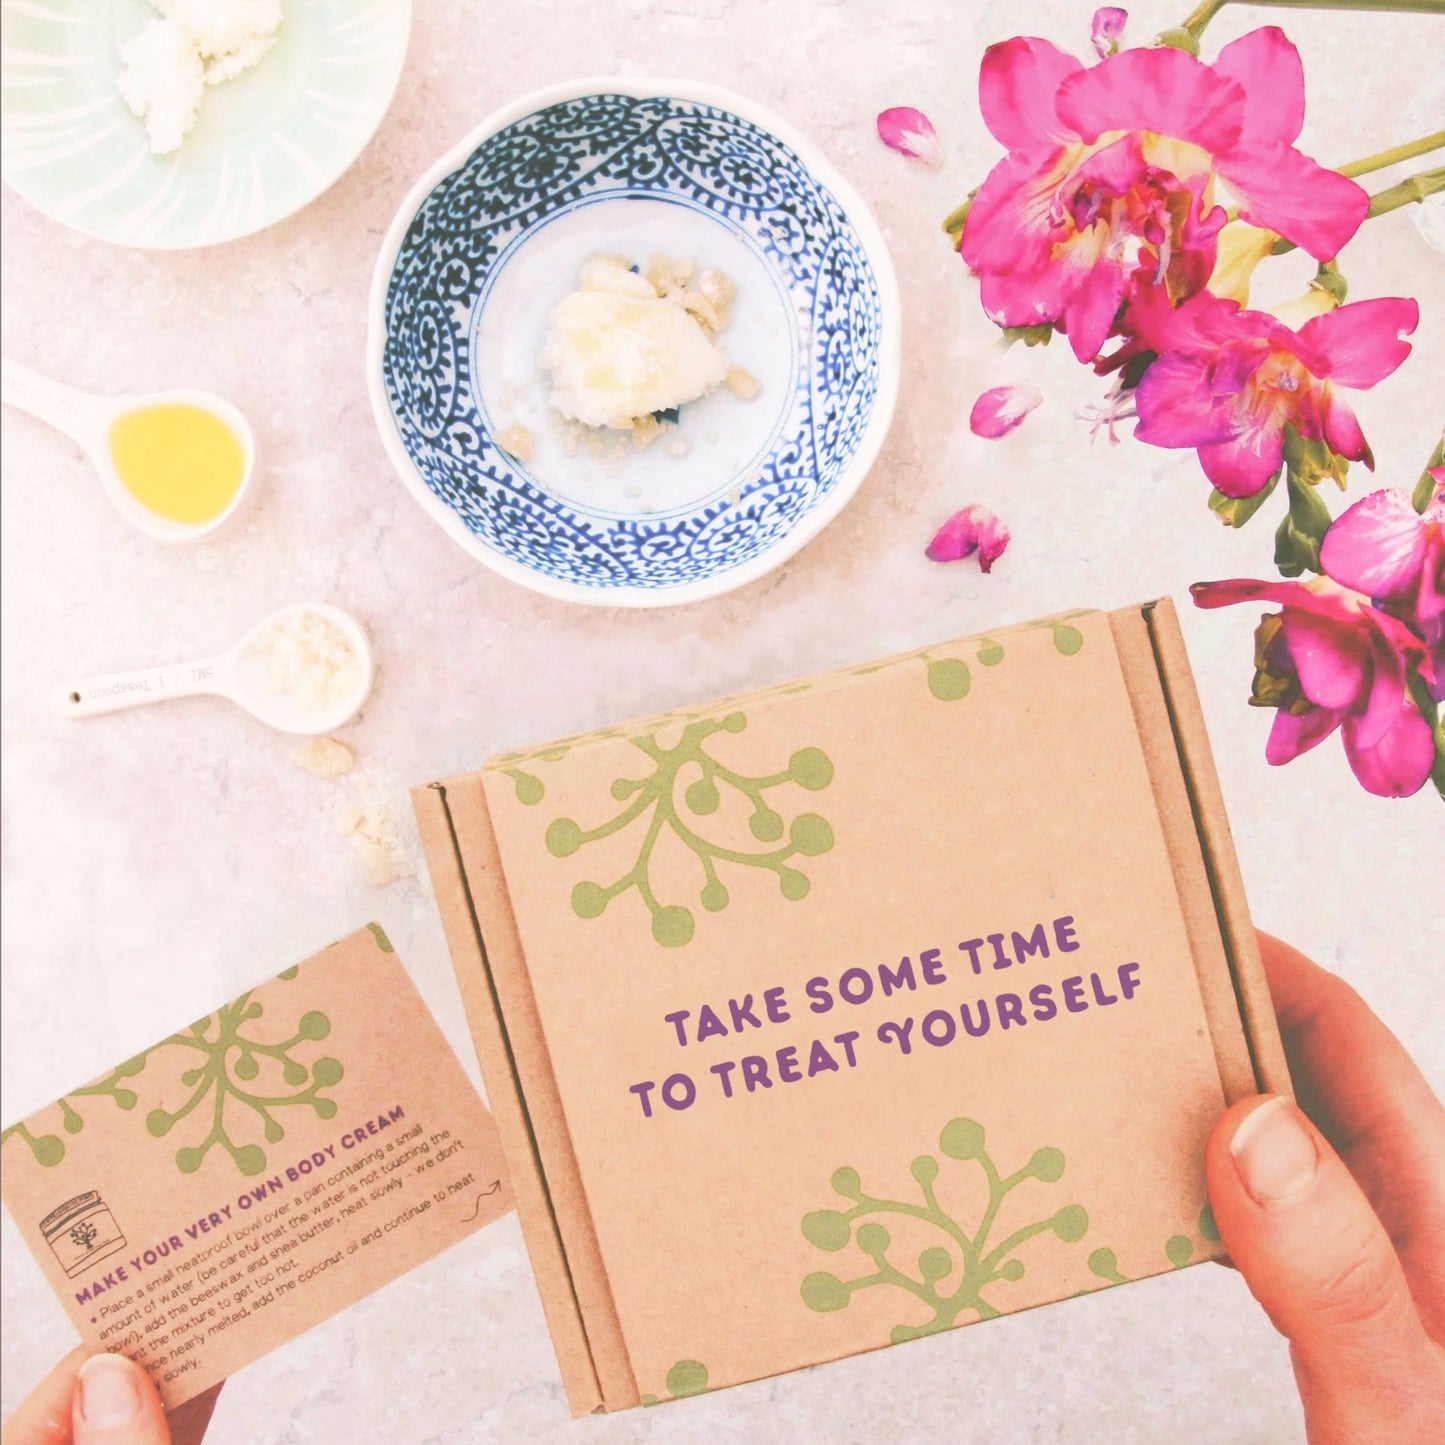 self care gift with gift message 'take some time to treat yourself'